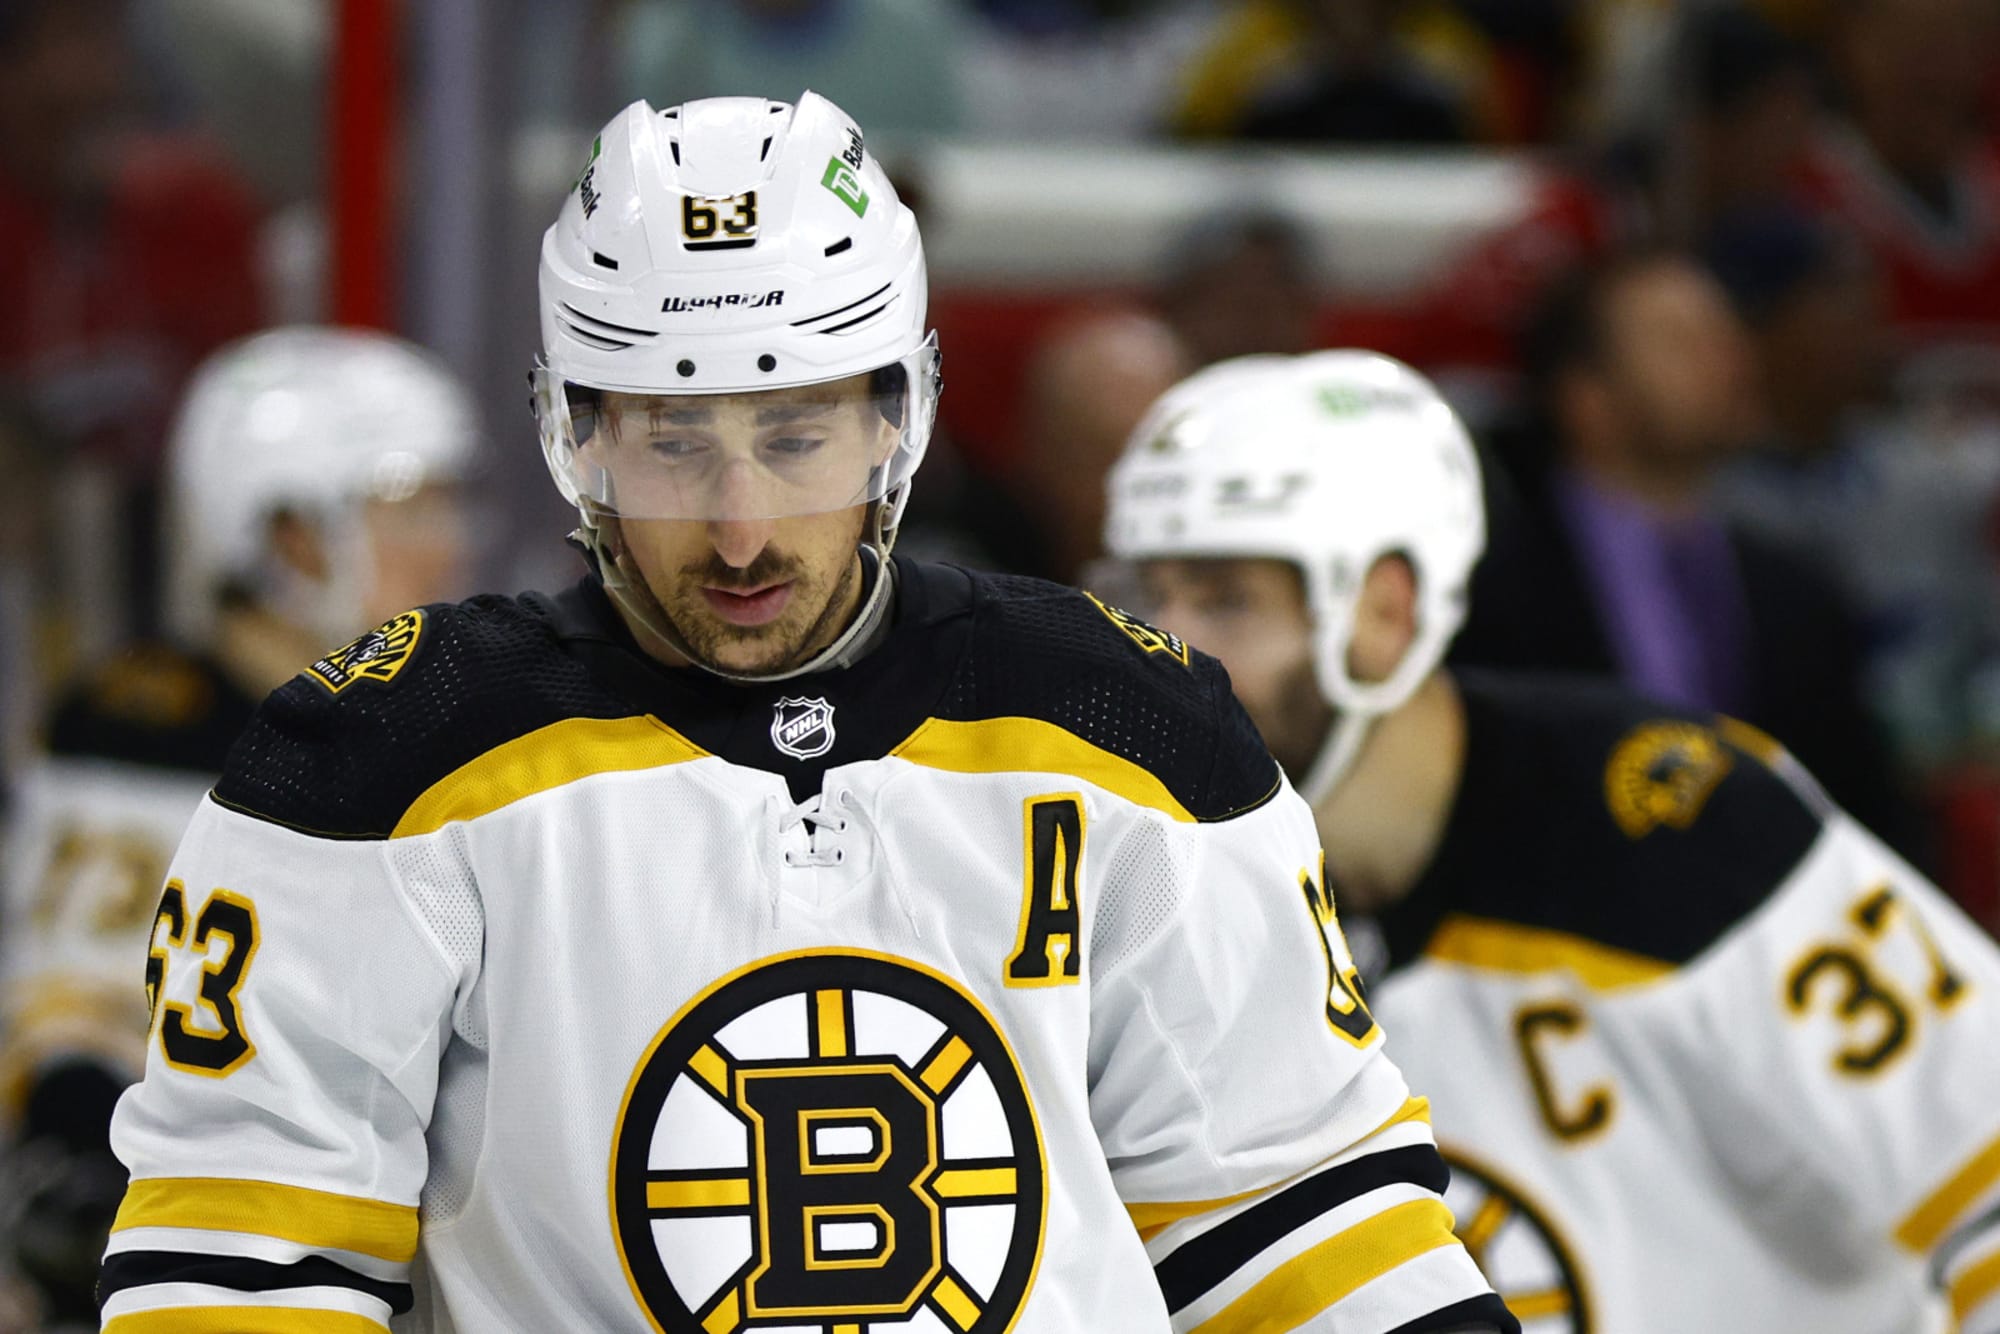 Where do the Boston Bruins go from their tough Game 7 loss?